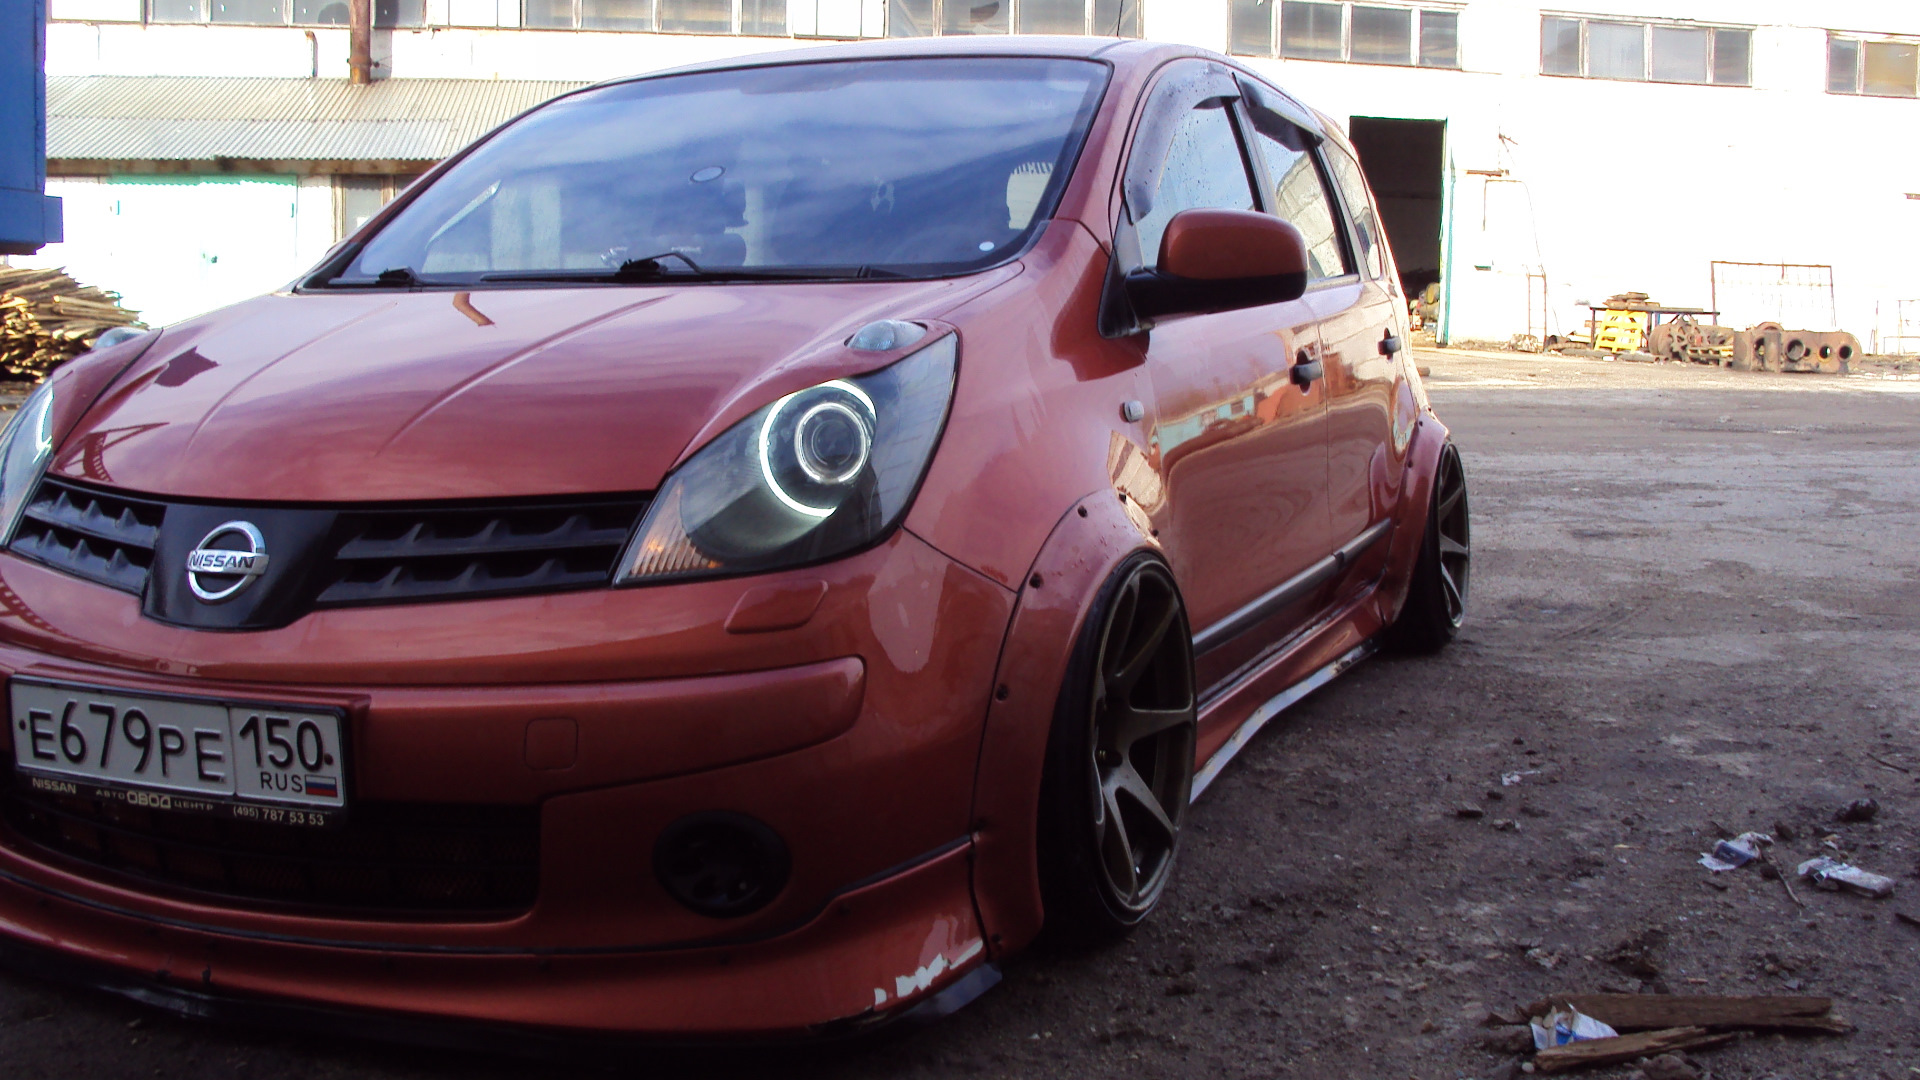 Фары nissan note e11. Nissan Note 2008 Tuning. Nissan Note 2005 Tuning. Обвес на Ниссан ноут е11. Nissan Note e11 1.4.